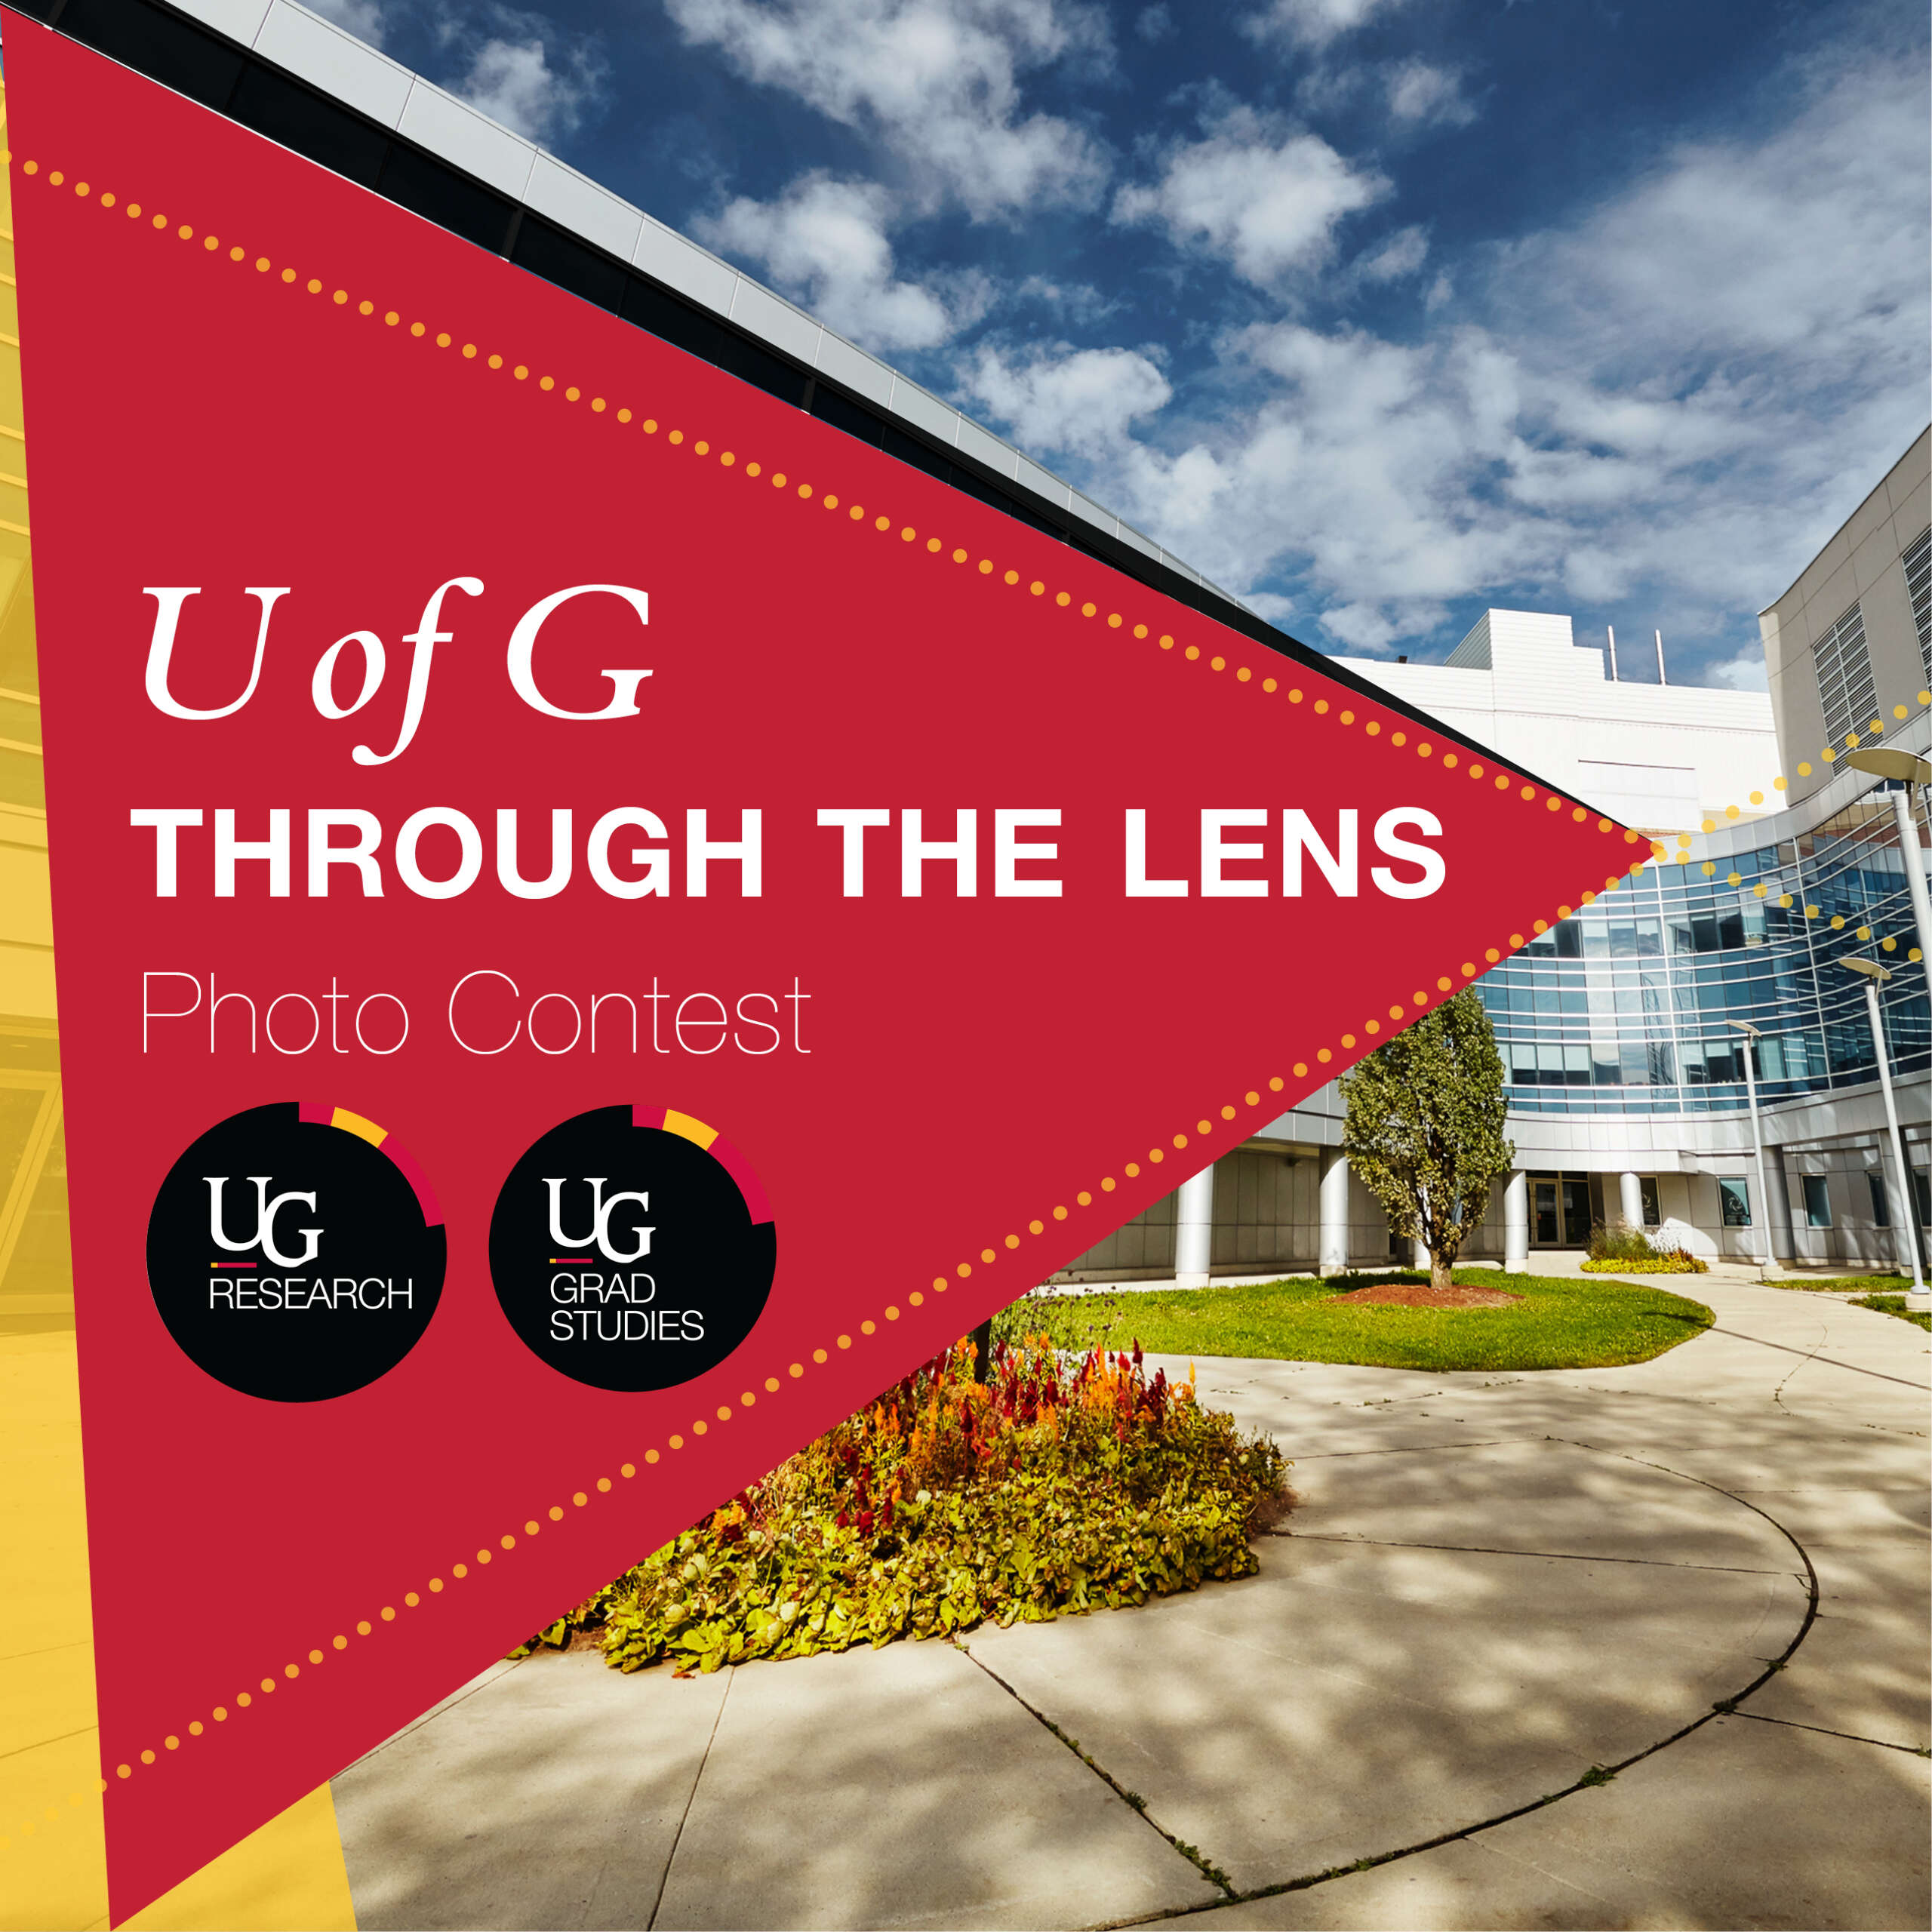 U of G “Through the Lens” Photo Contest Is Accepting Submissions